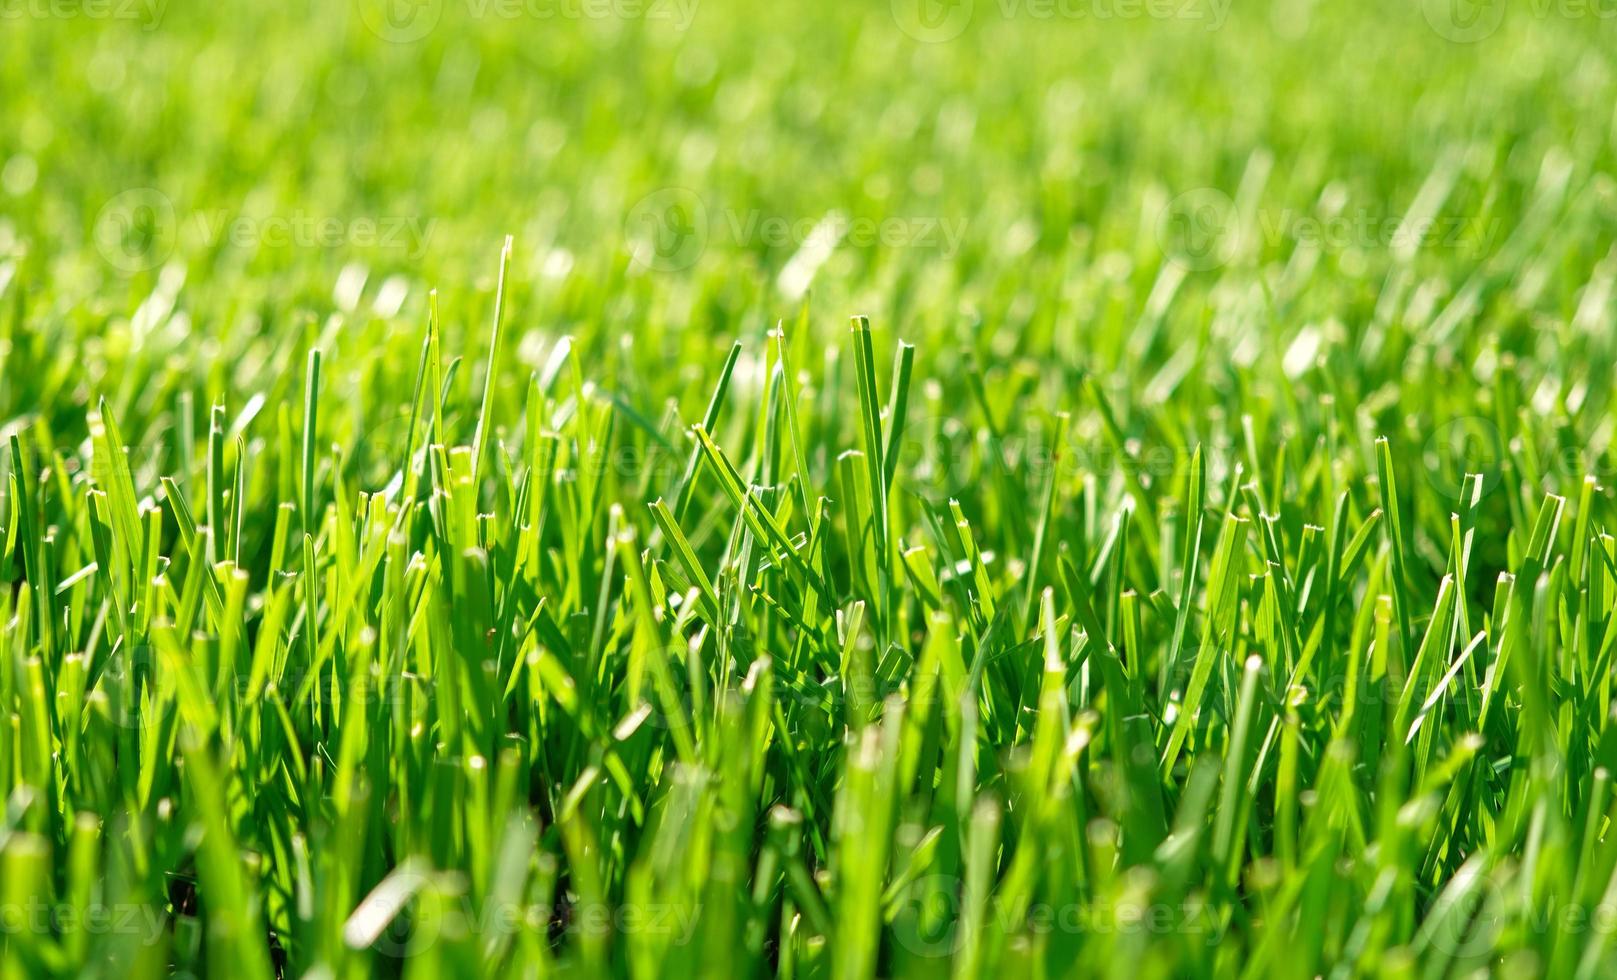 Close up green grass, natural greenery background texture of lawn garden. Ideal concept used for making green flooring, lawn for training football pitch, Grass Golf Courses, green lawn pattern. photo